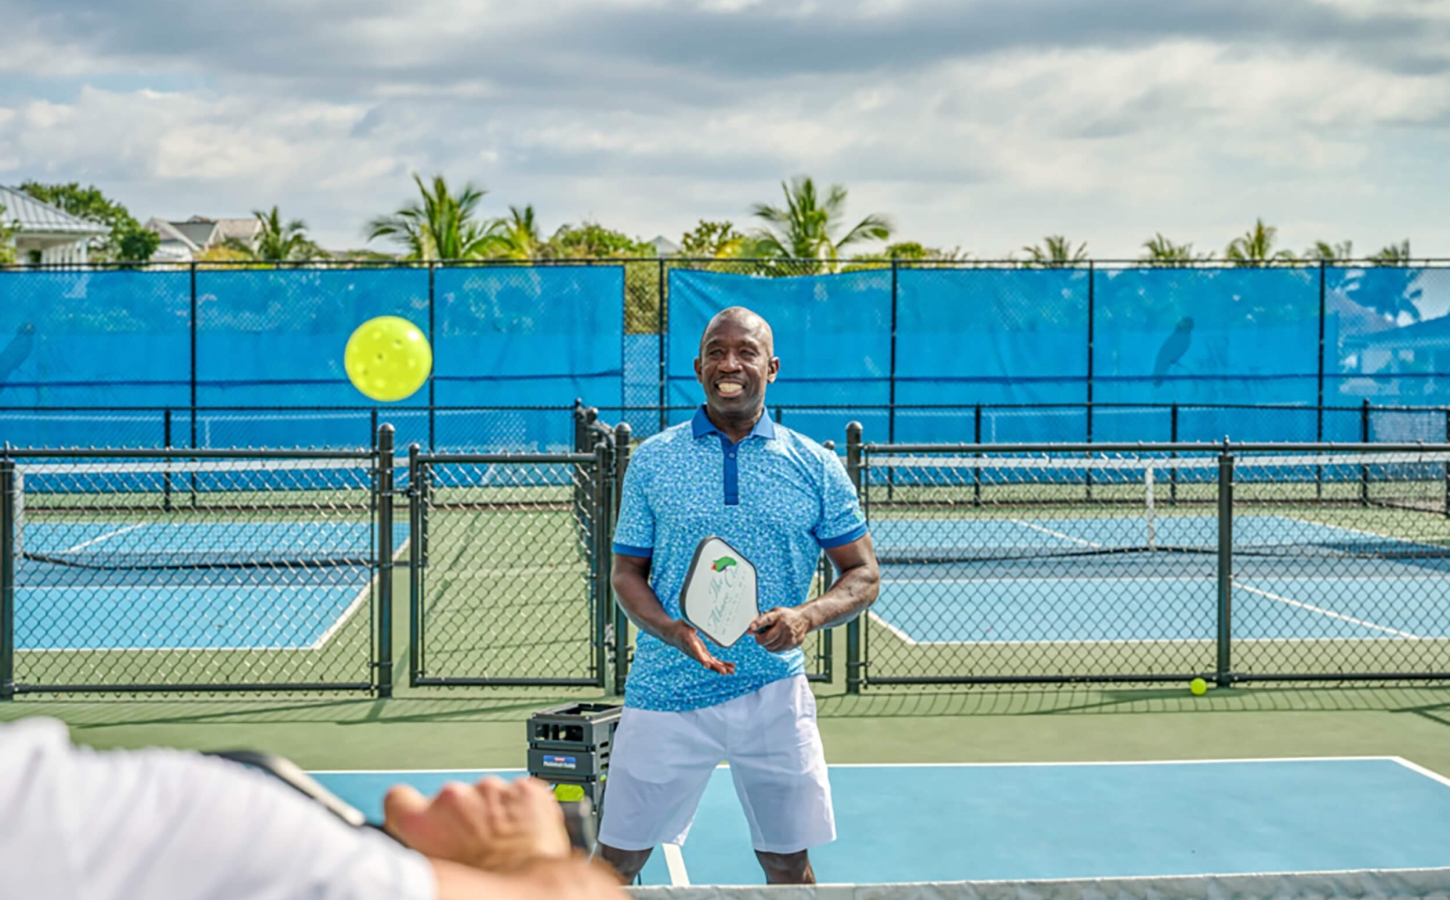 Enthusiastic player enjoying a game of pickleball at The Abaco Club.